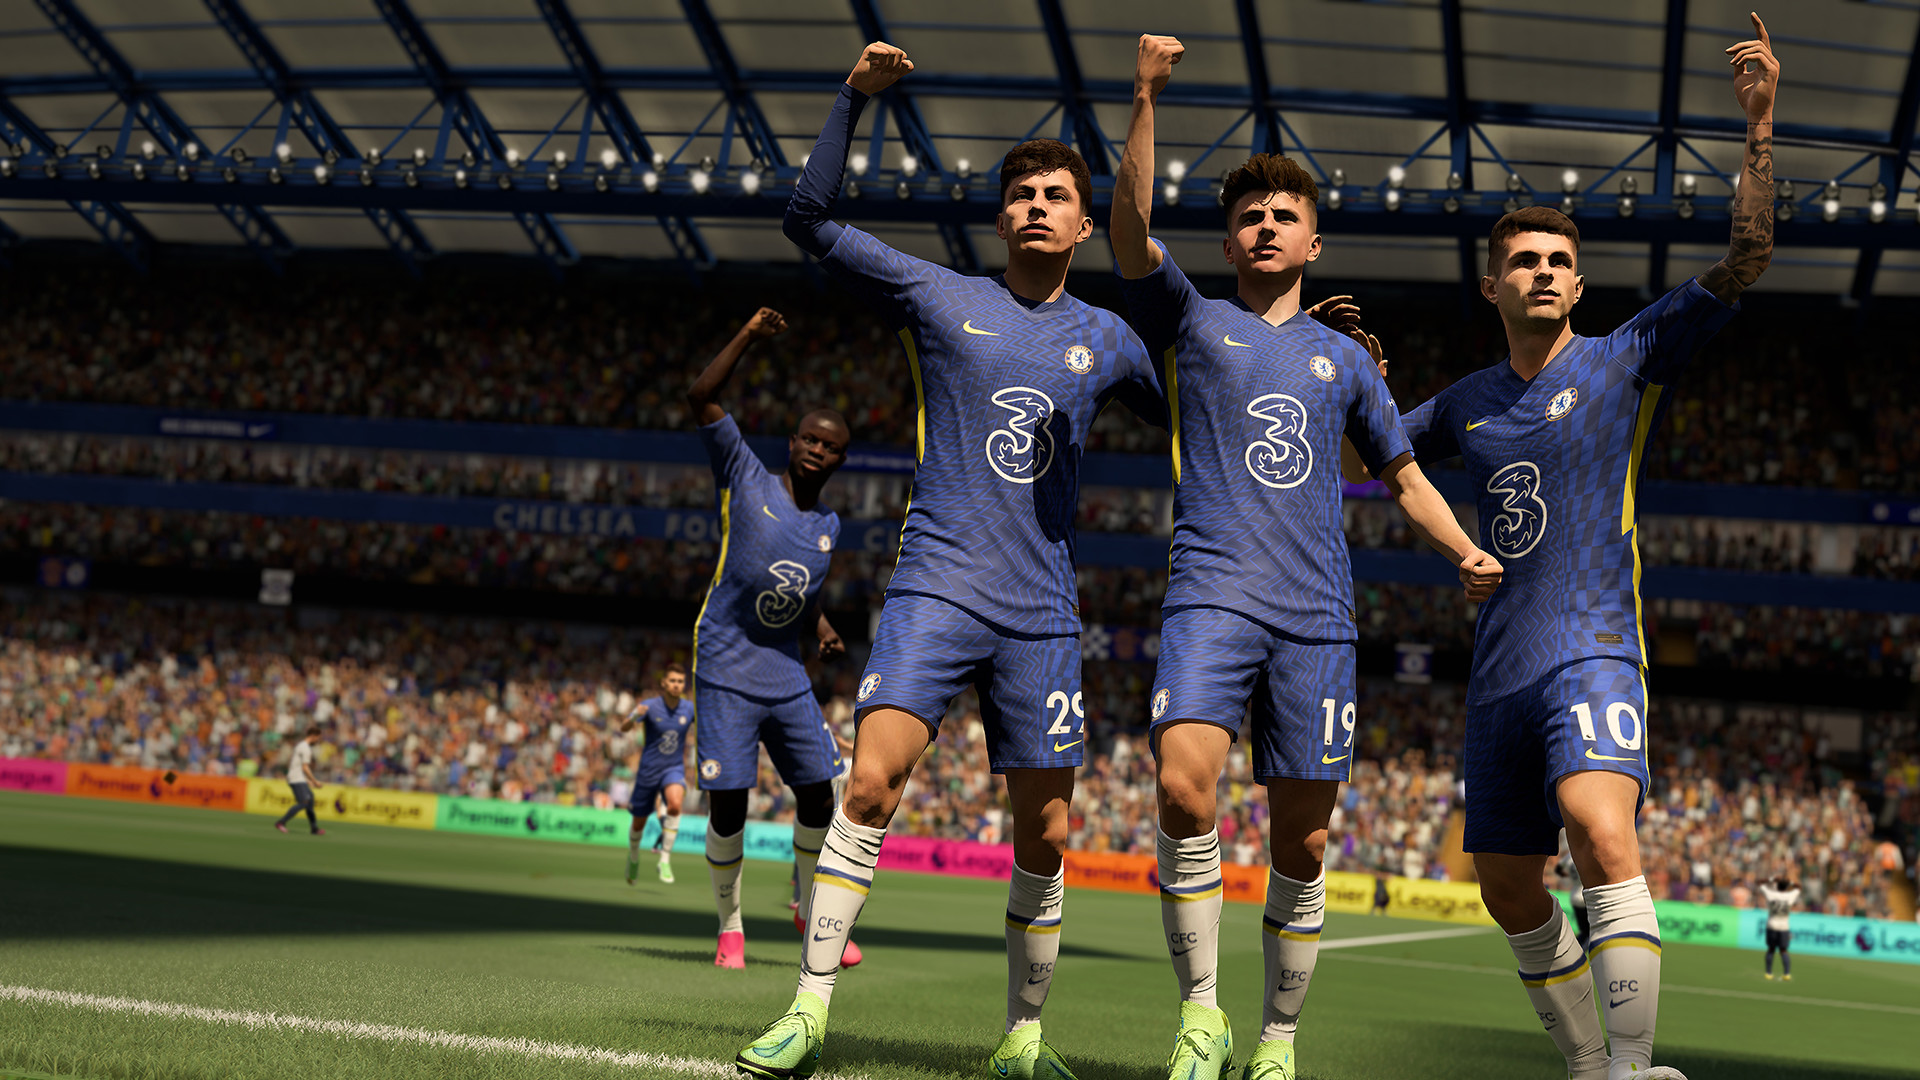 FIFA 23 will reportedly be called EA Sports Football Club